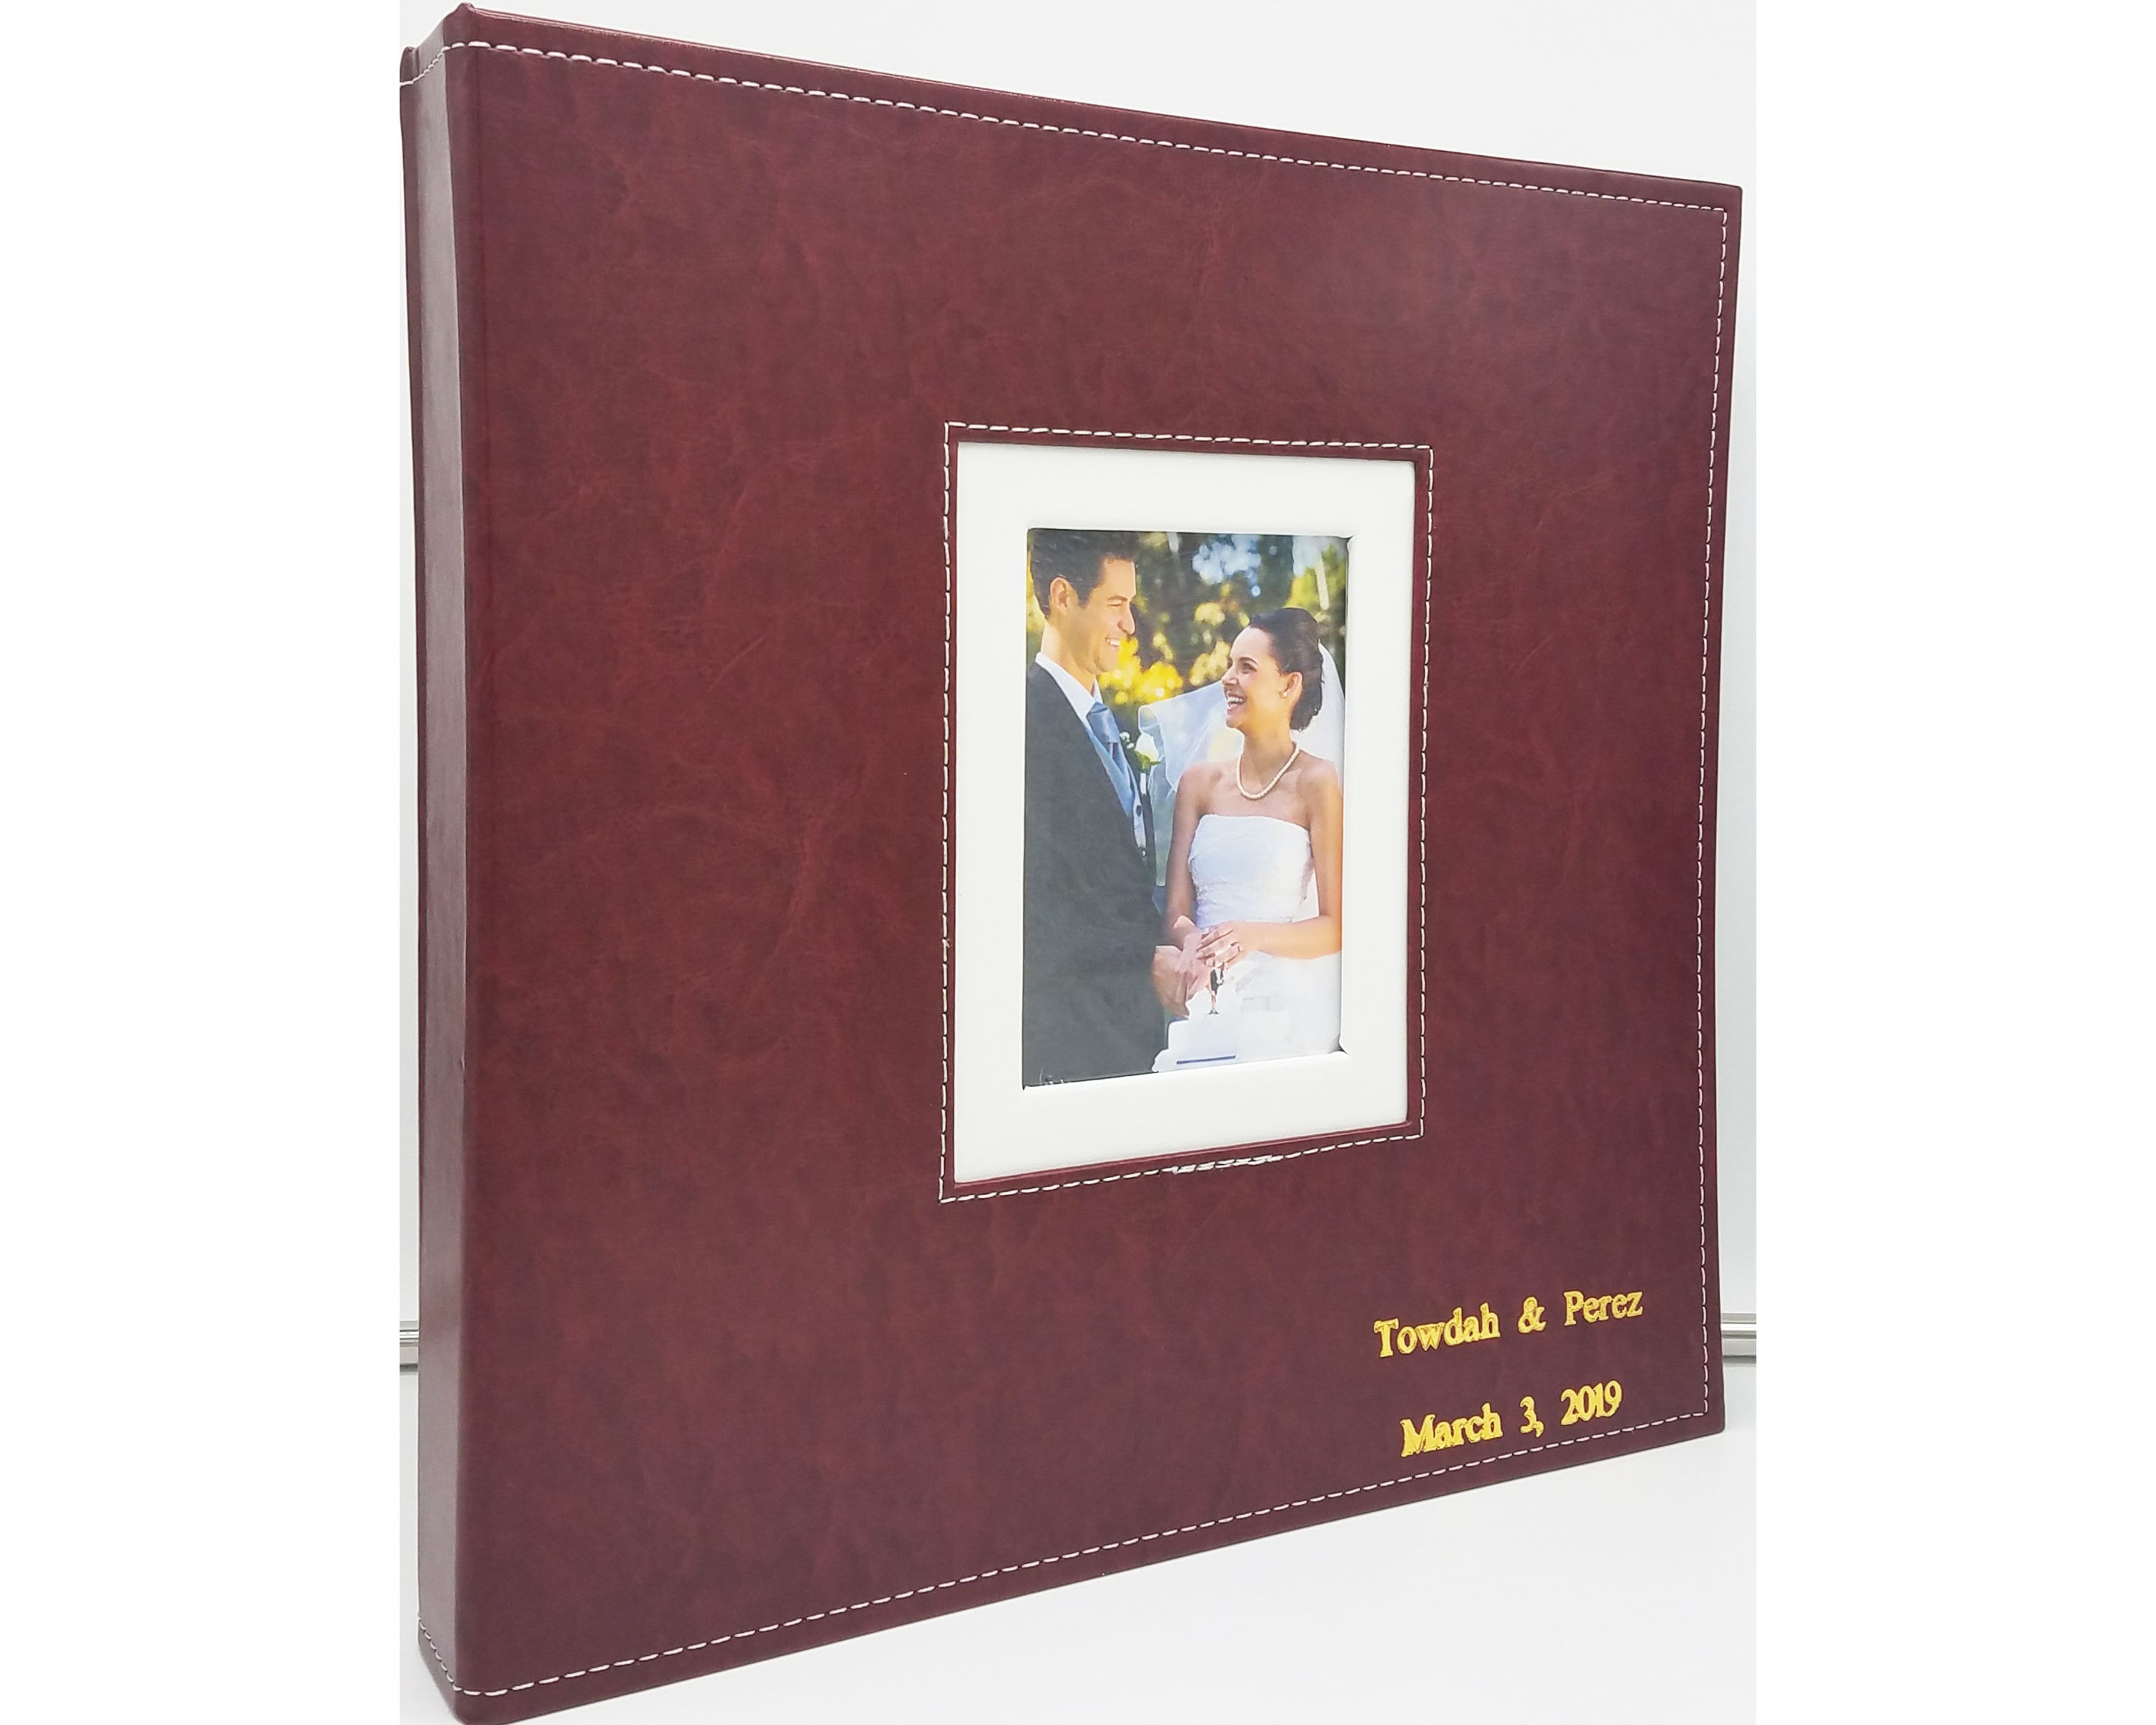  Small Photo Album 5x7 Holds 72 Photos 2 Pack, Photo Album 5x7  Leather Cover with Front Window, 5x7 Photo Album Book, Black Inside Pages  5x7 Photo Album for 5x7 Wedding Family